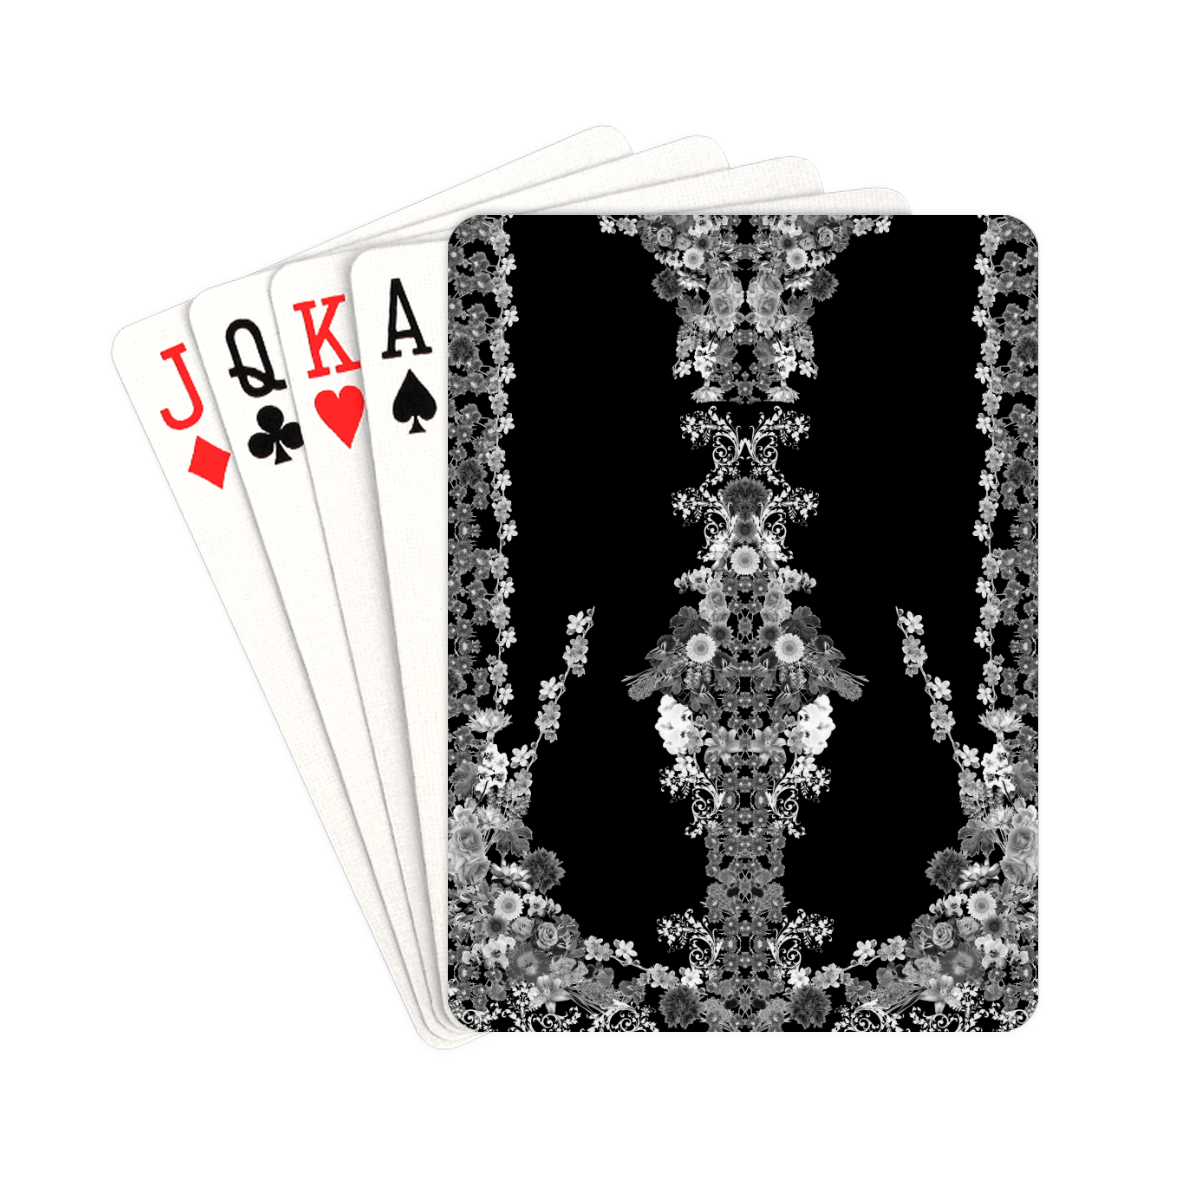 floral-black Playing Cards 2.5"x3.5"